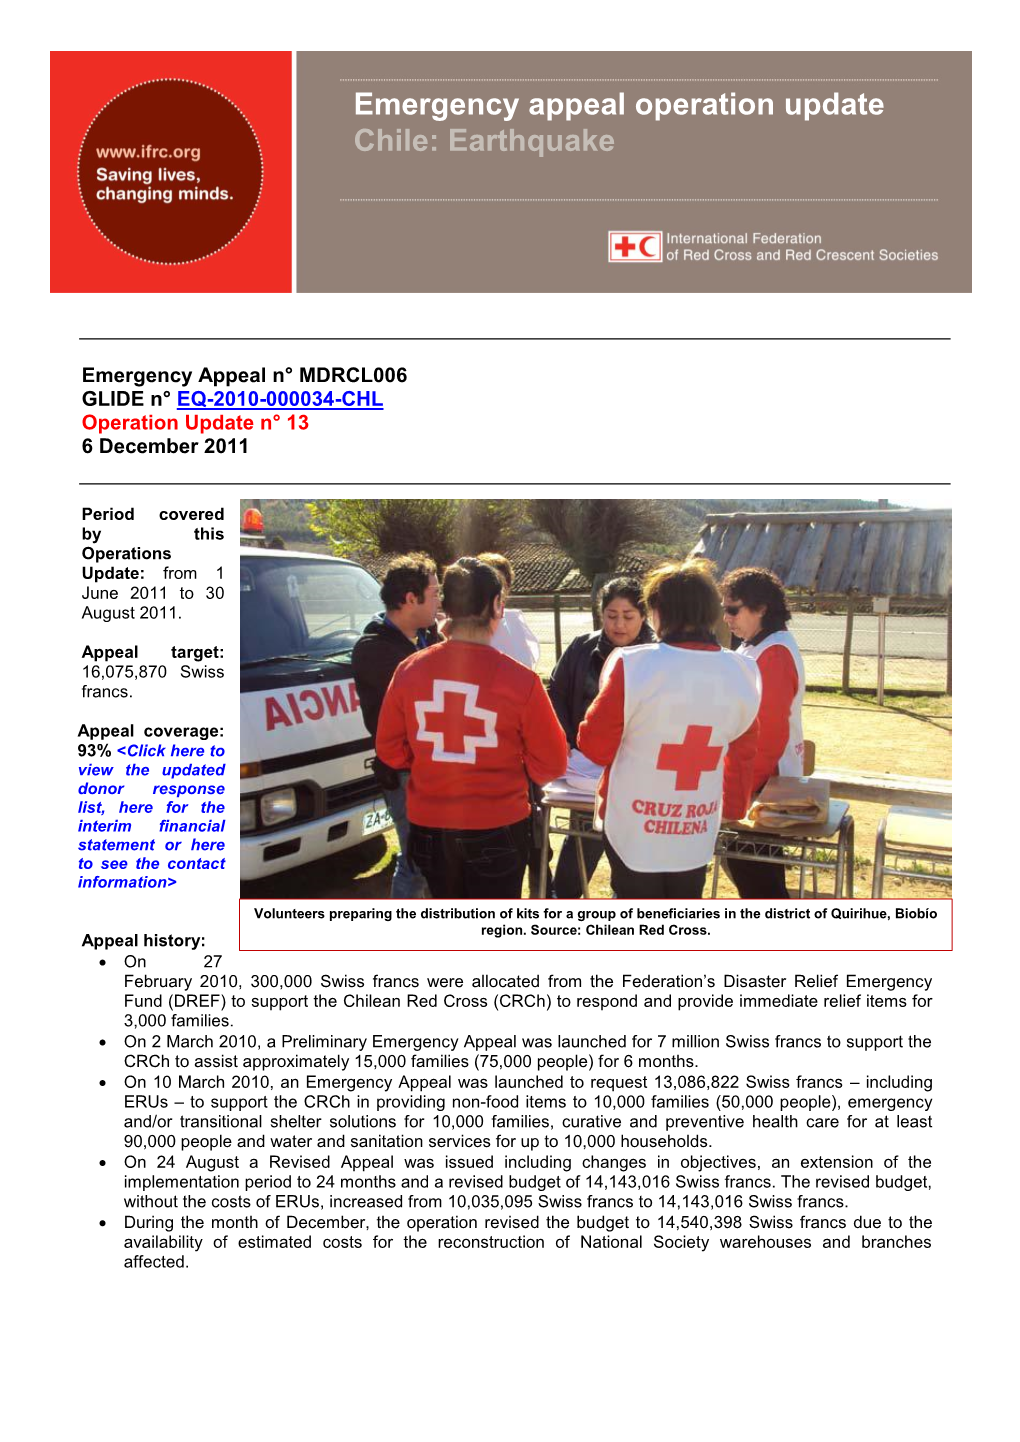 Emergency Appeal Operation Update Chile: Earthquake